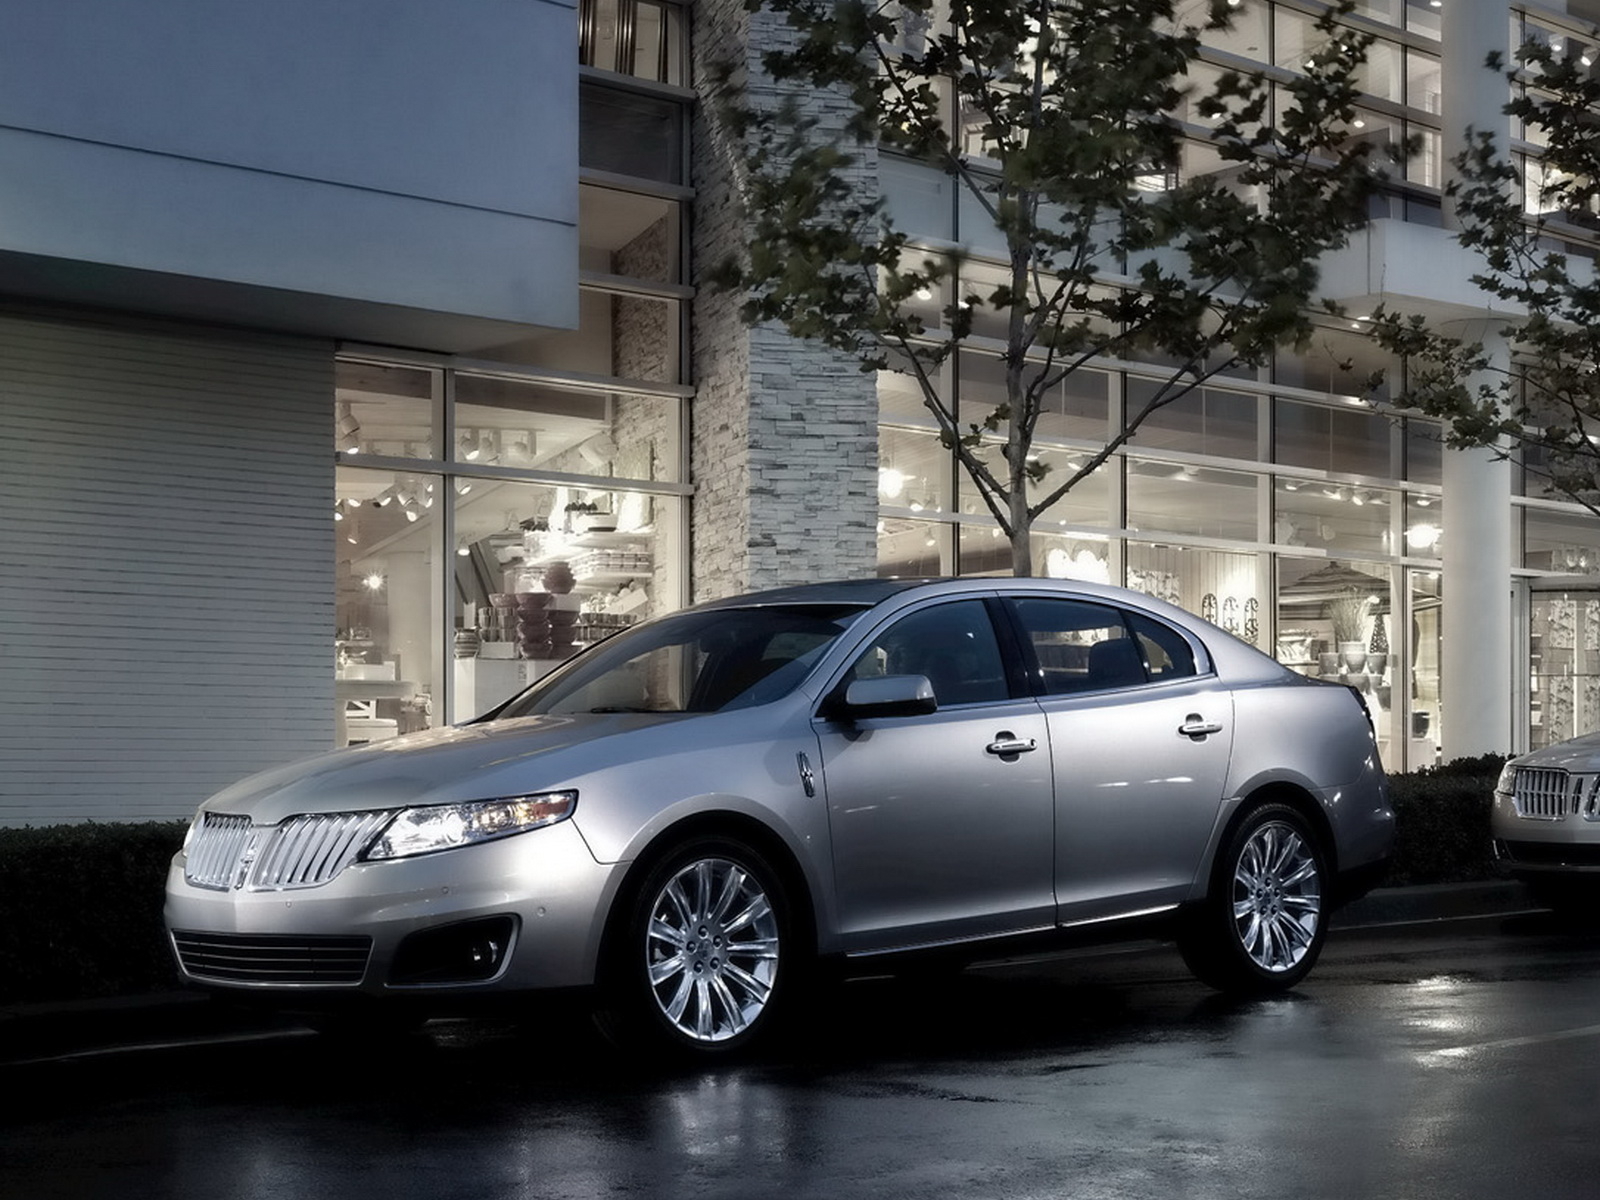 New Lincoln-MKS